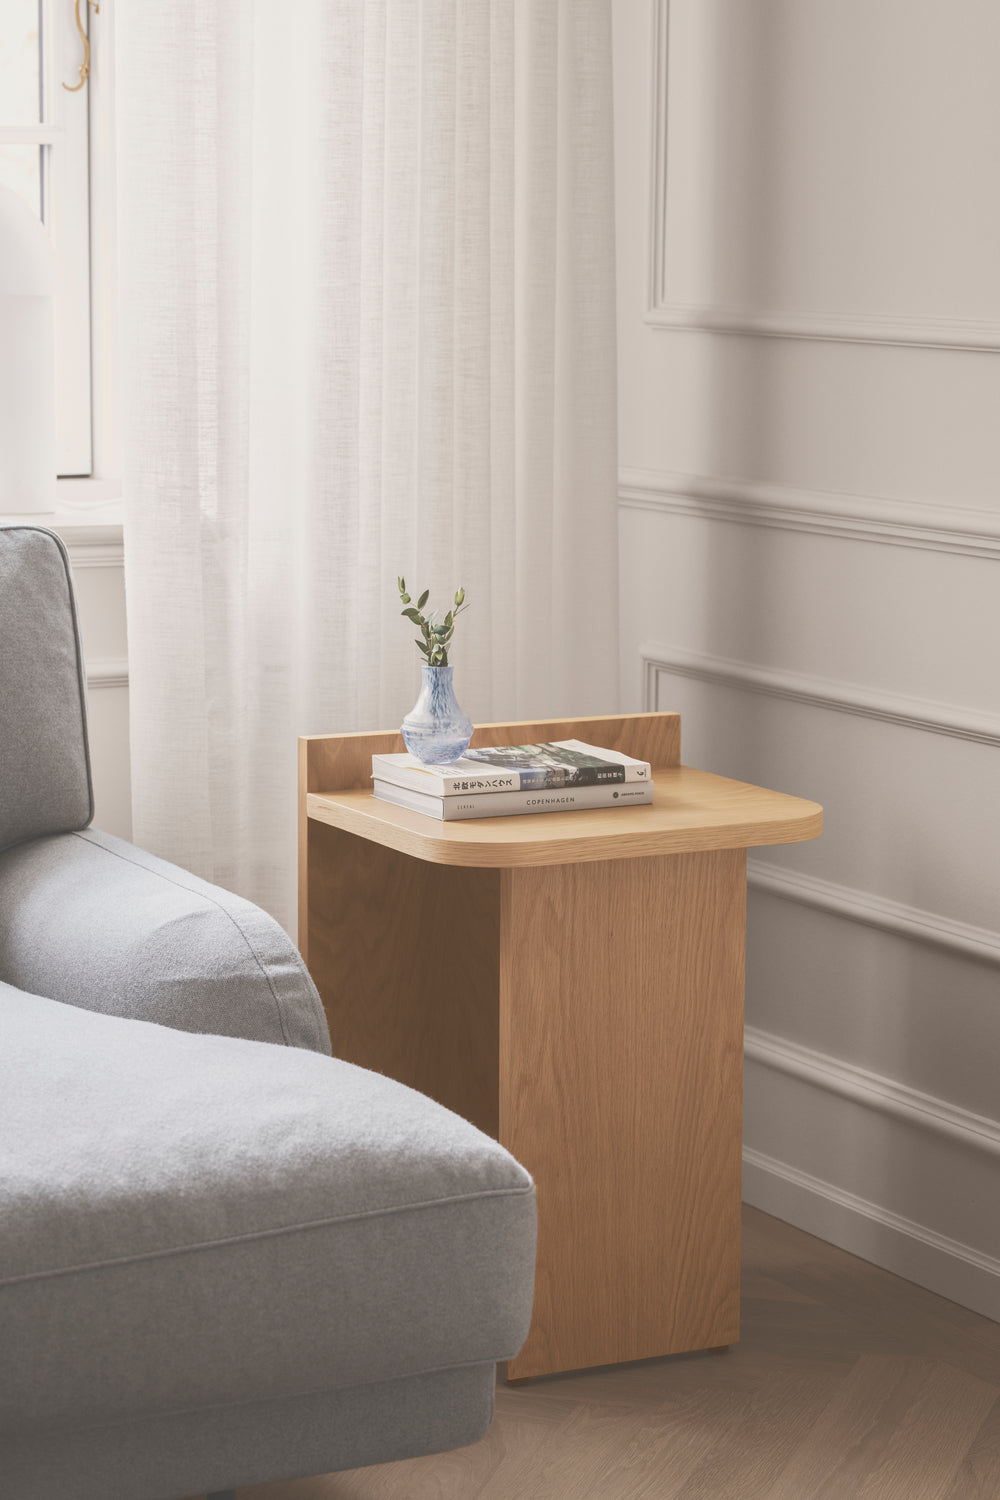 Gejst Ismo Side Table, Eiche